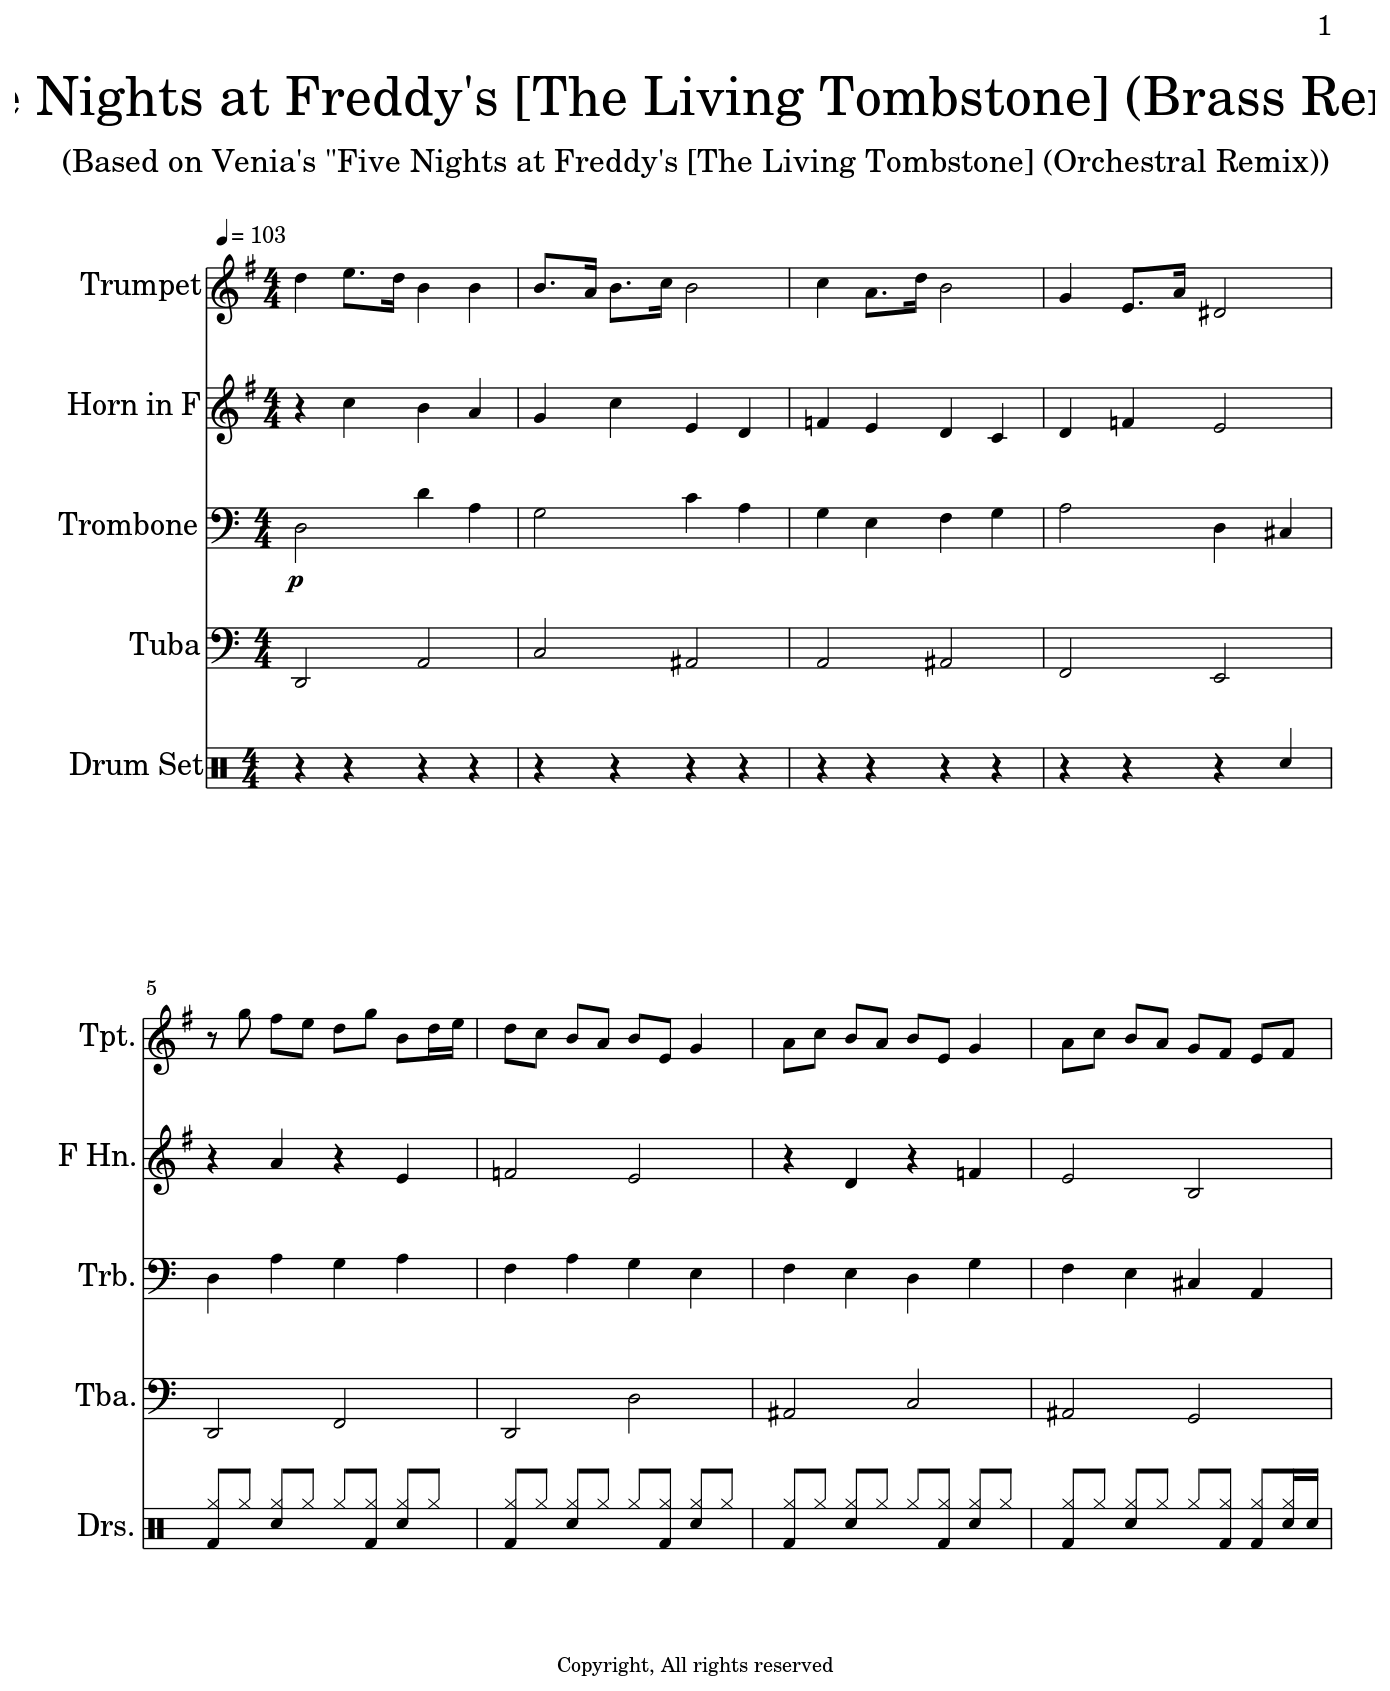 Free Five Nights At Freddy's by The Living Tombstone sheet music